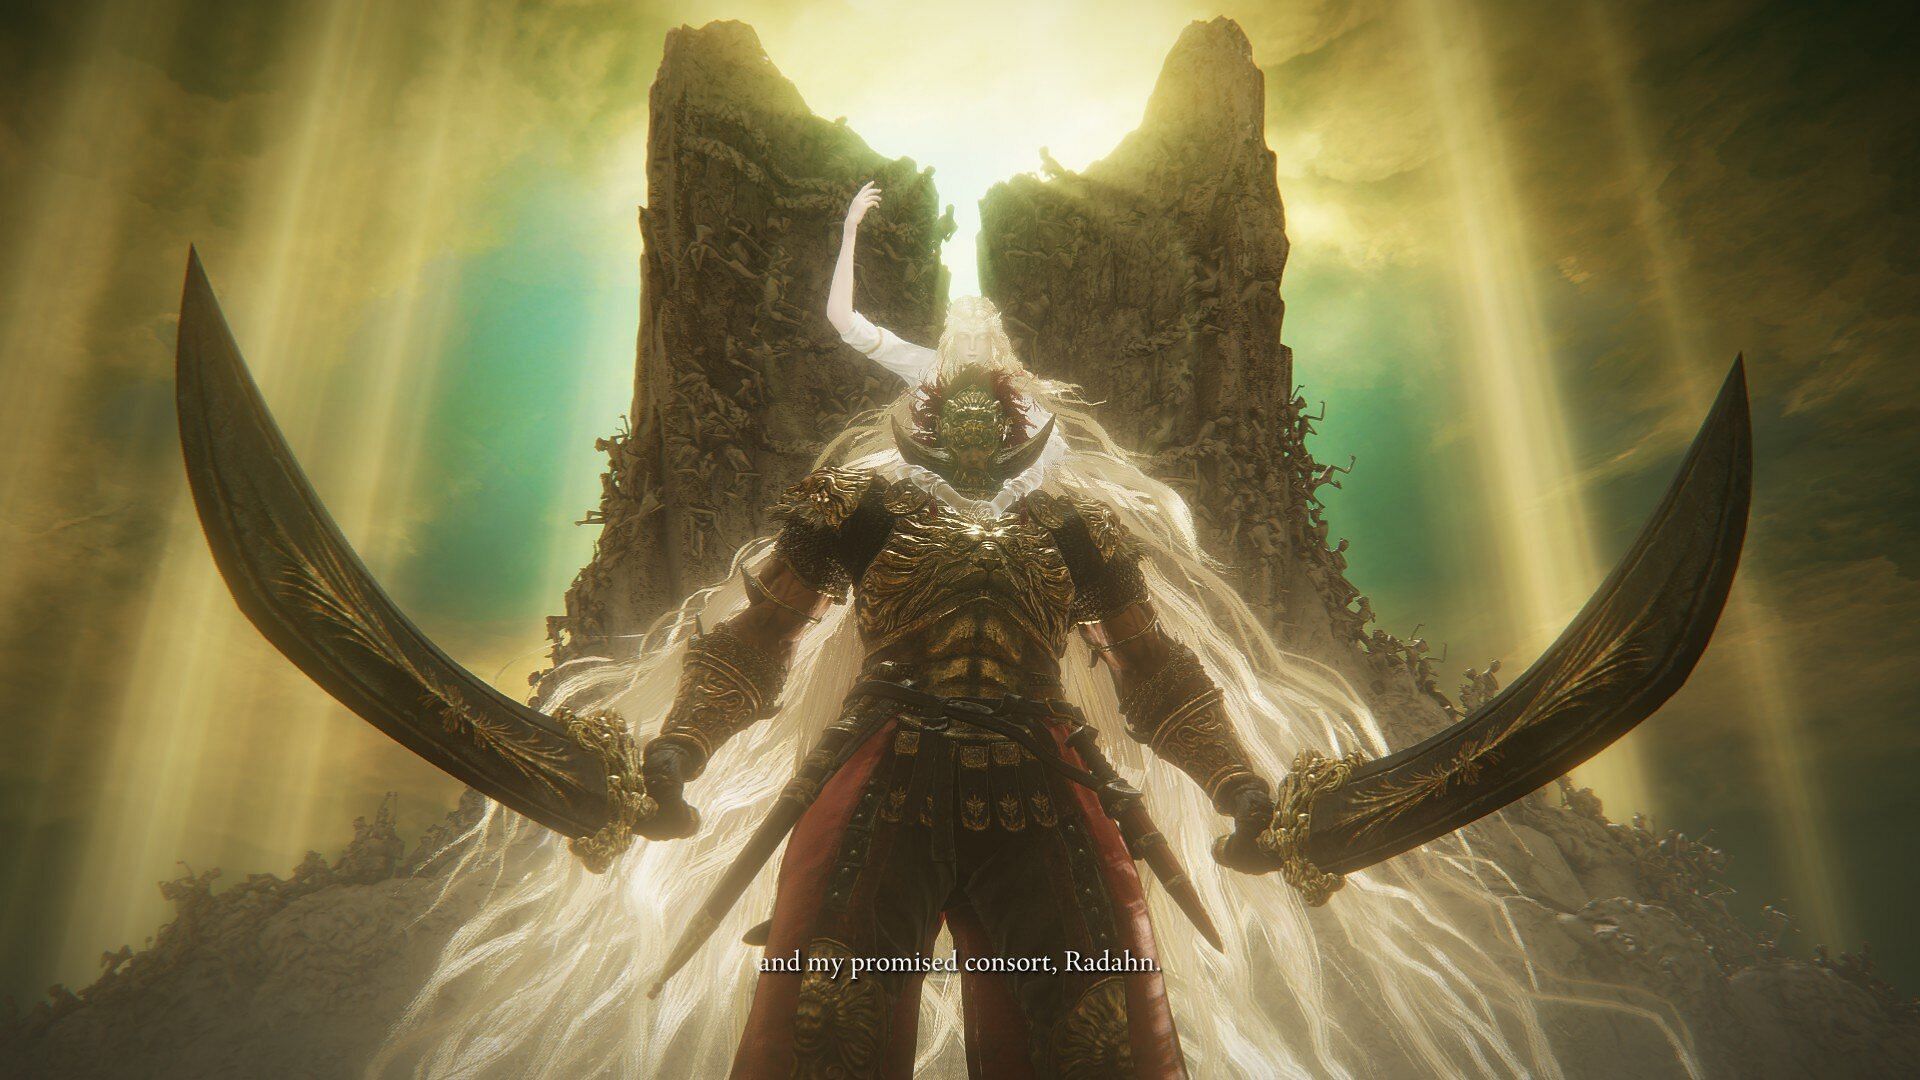 Promised Consort Radahn is easily the toughest boss fight in Elden Ring Shadow of the Erdtree (Image via FromSoftware)